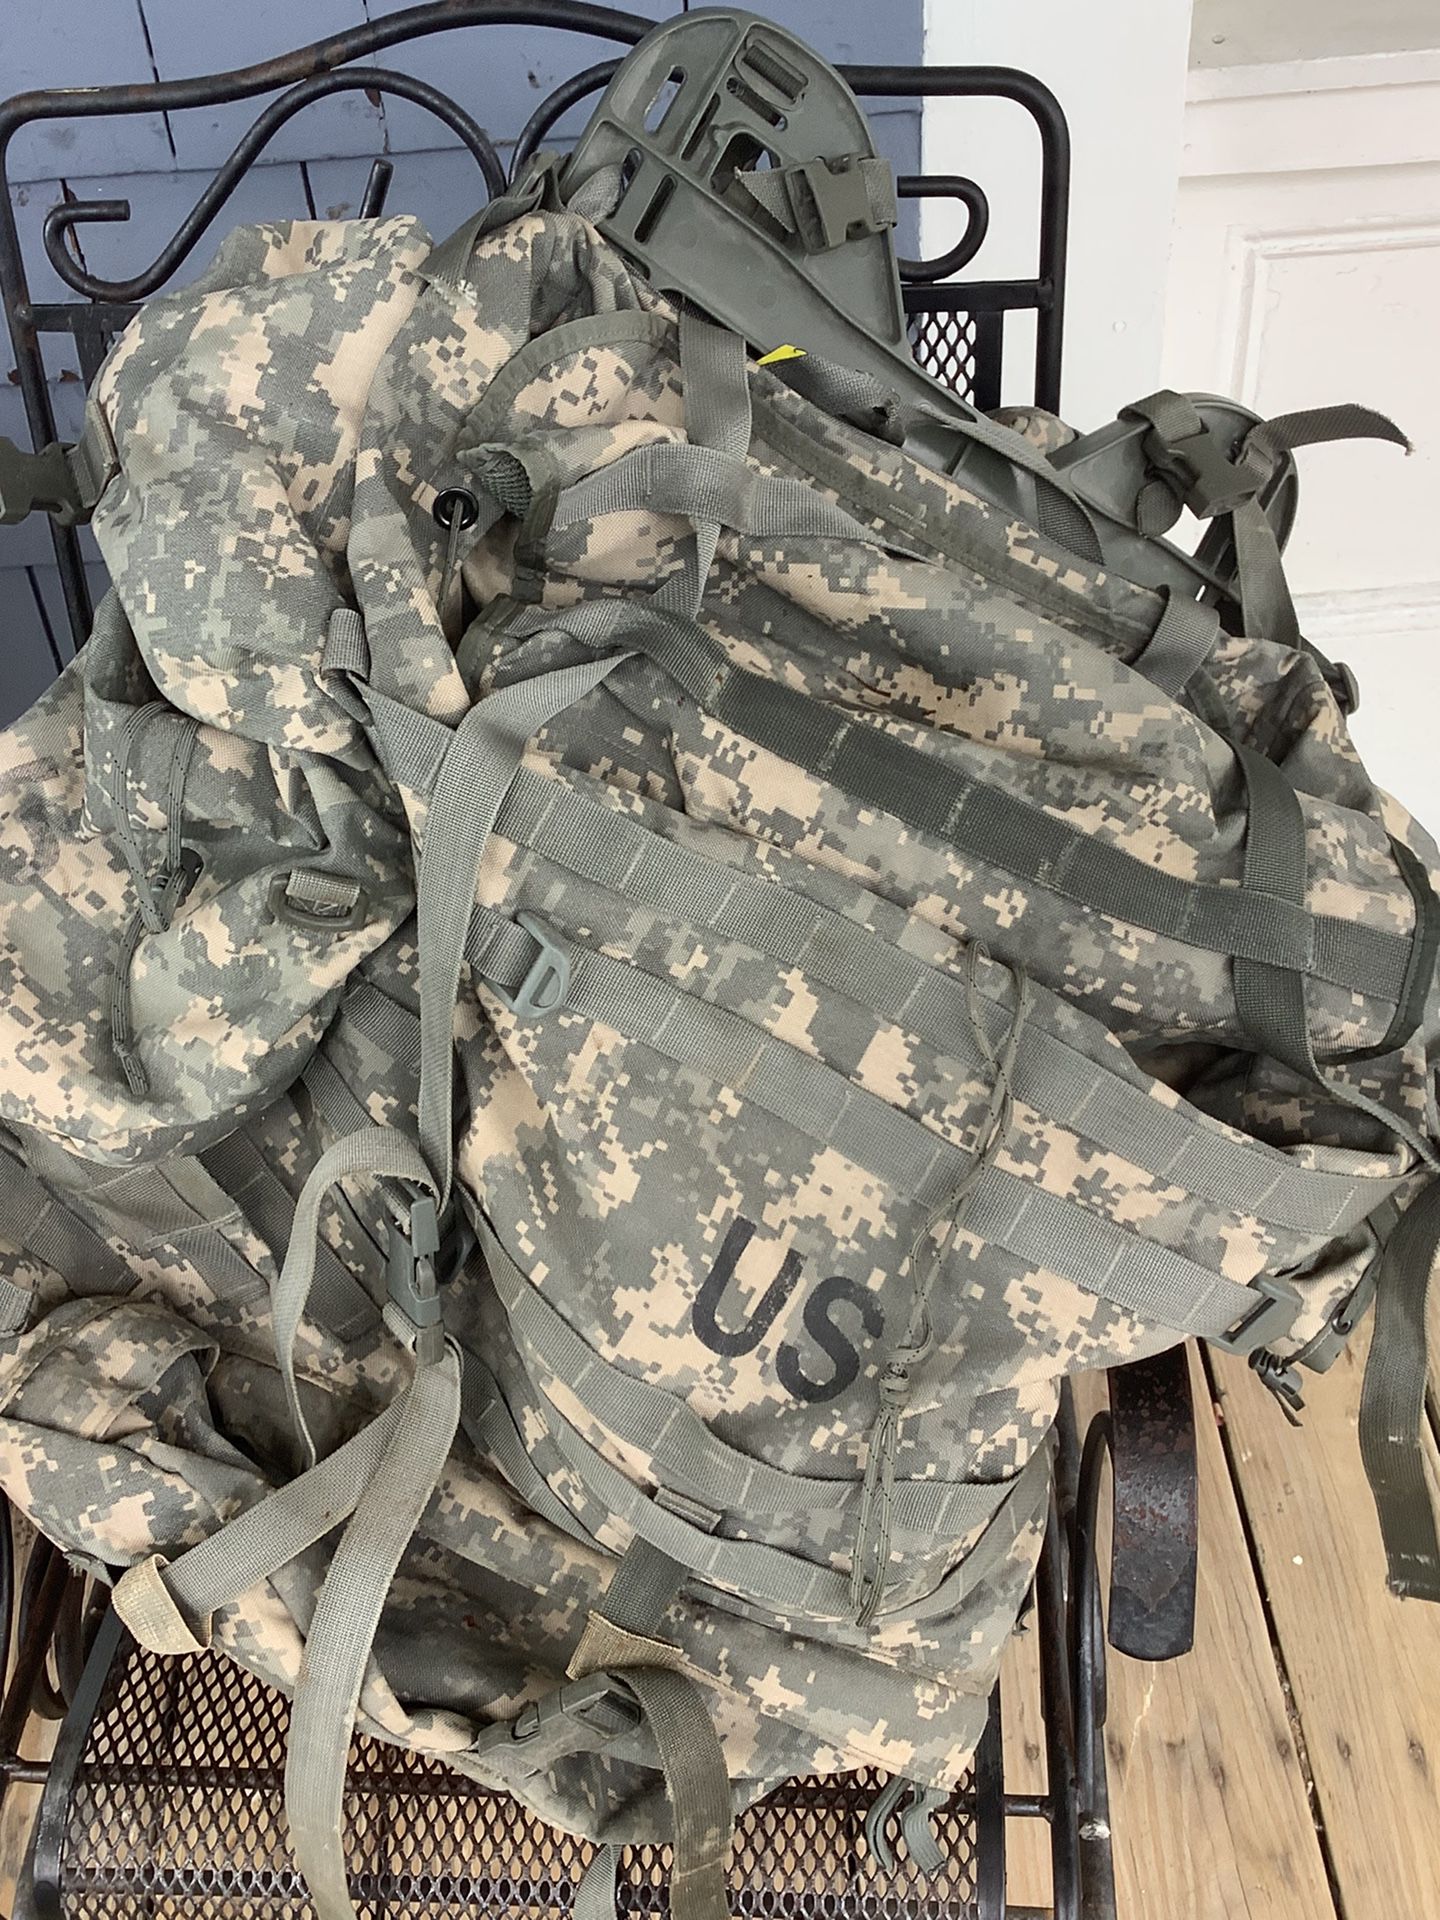 Army Back Pack